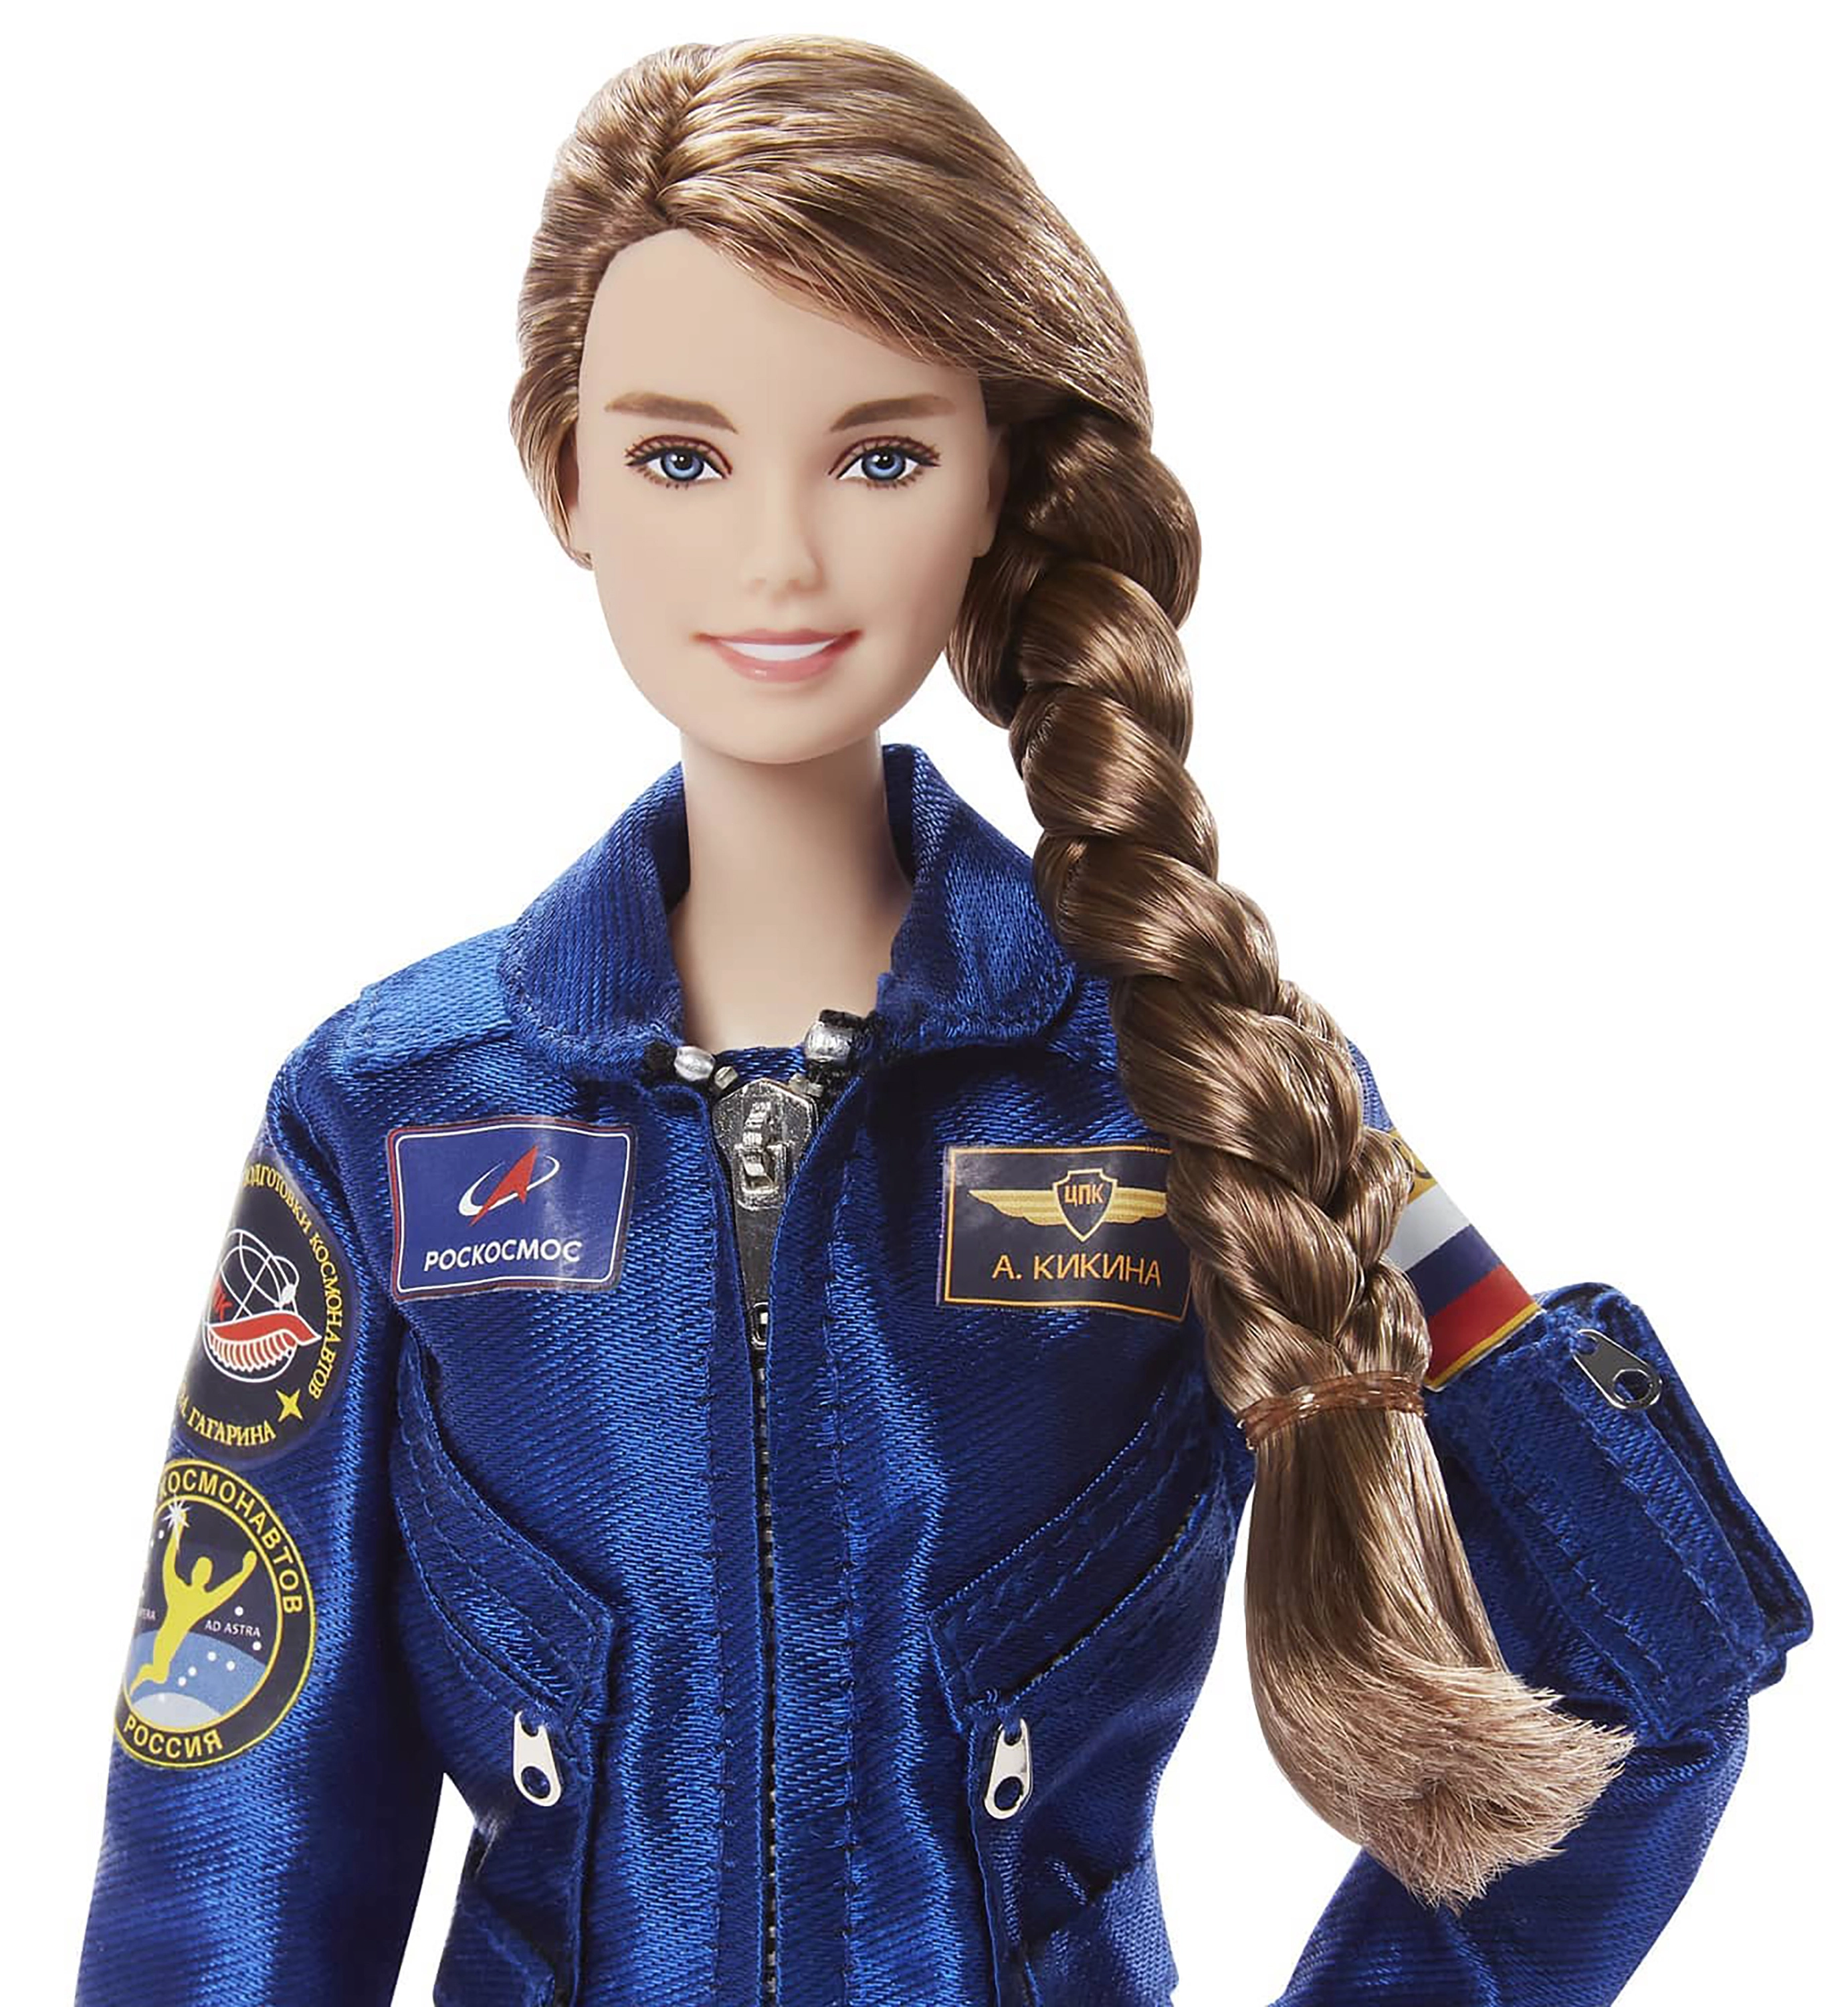 A Barbie astronaut was made earlier this year